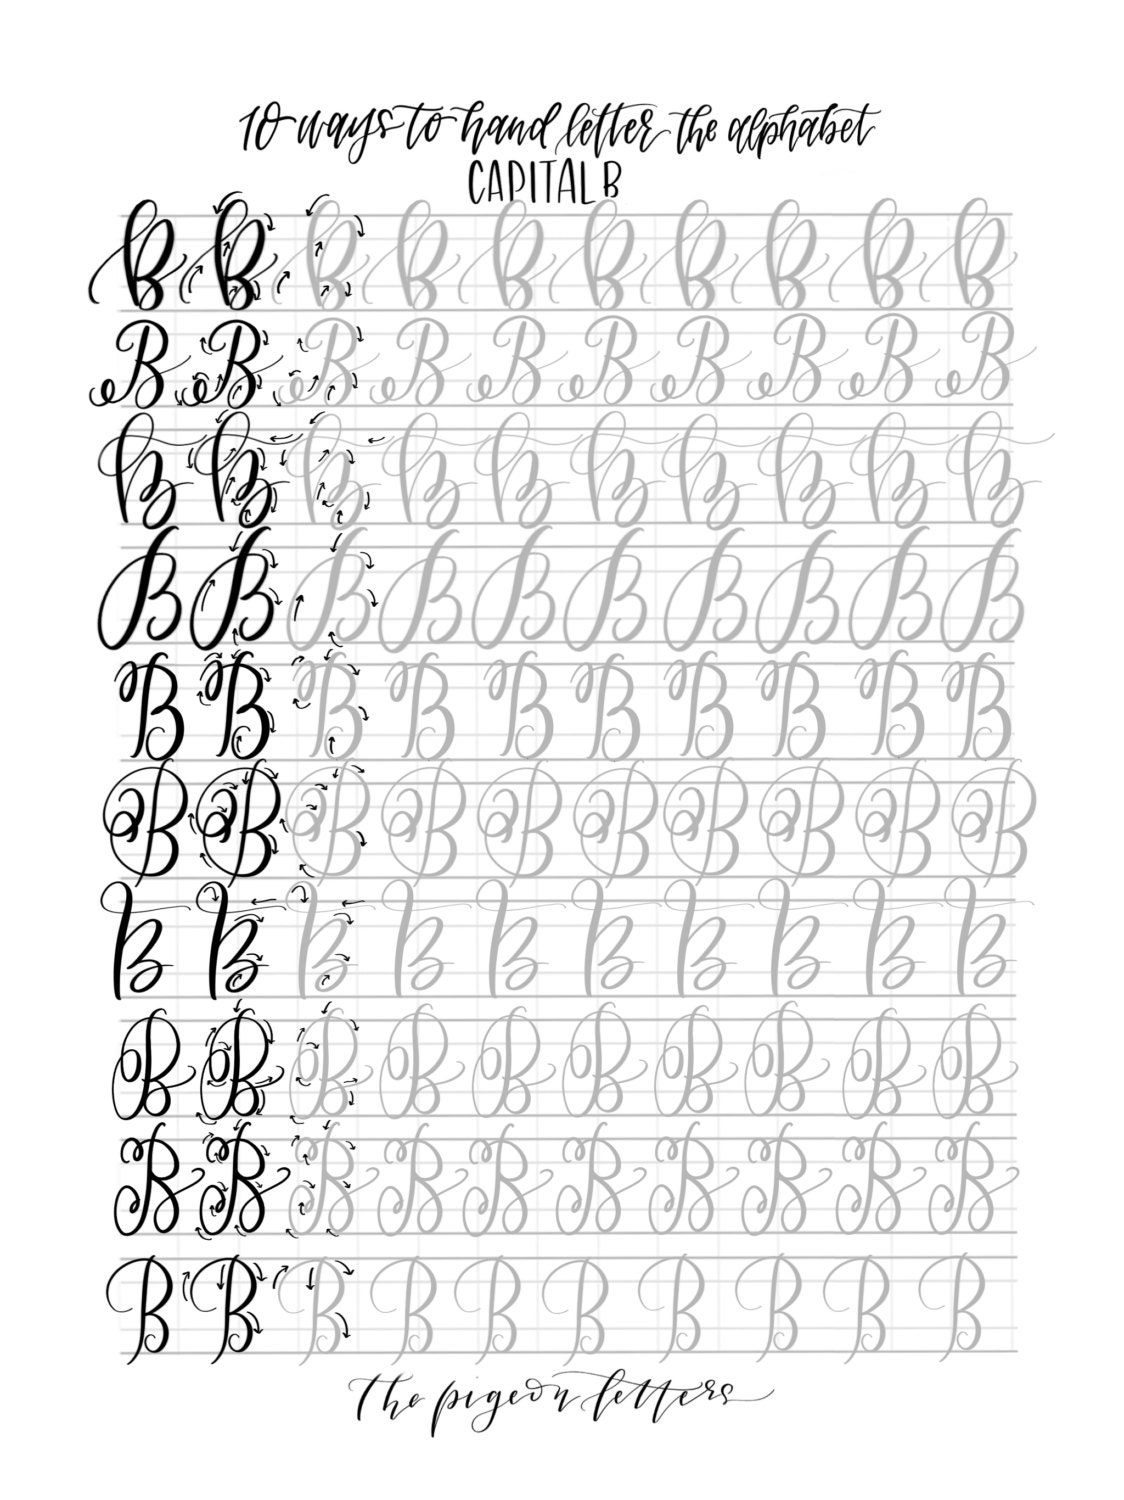 BUNDLE Save Hand Lettering Practice Sheets By ThePigeonLetters